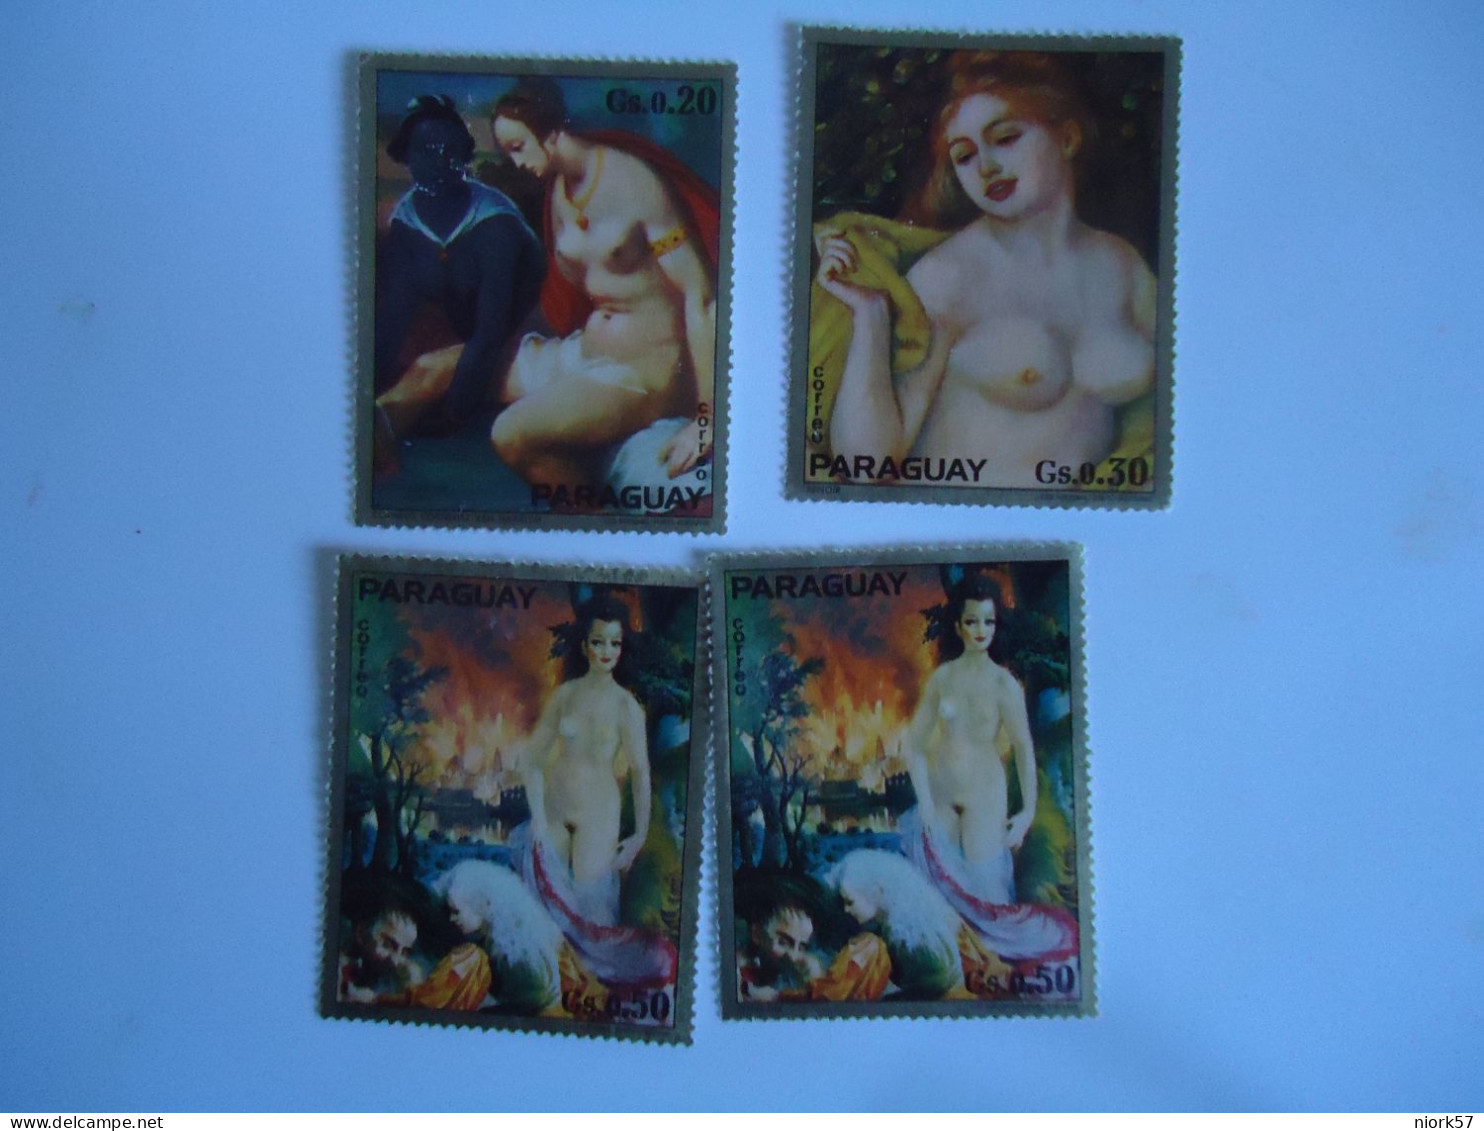 PARAGUAY  MNH 3 MLN 1 4 STAMPS  PAINTINGS NUDES - Nudes